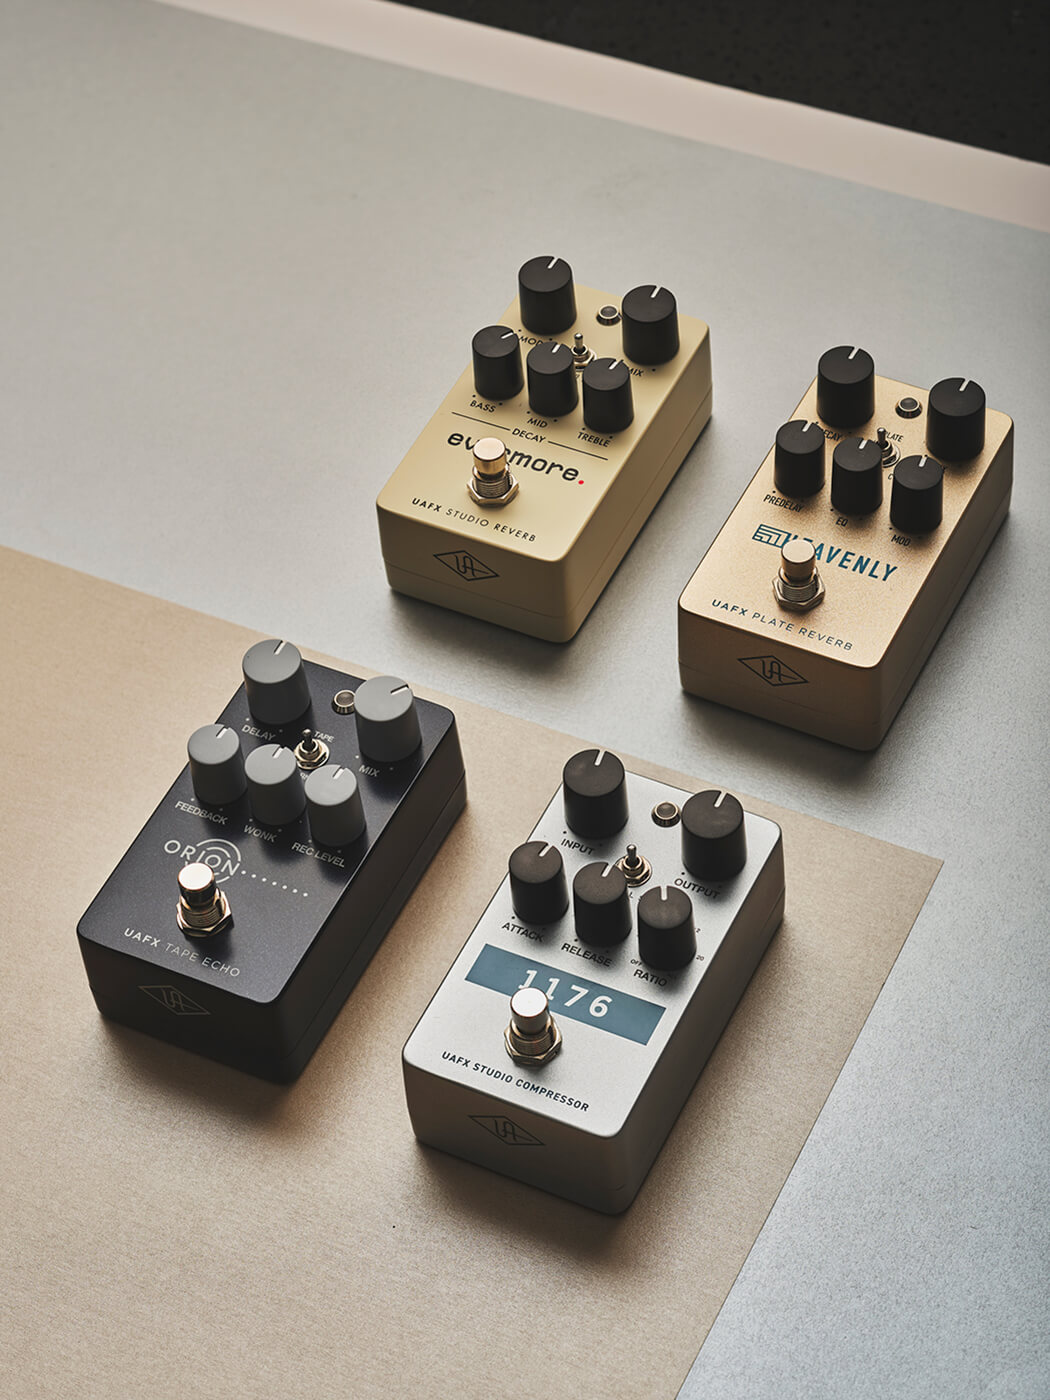 Universal Audio UAFX pedals, photo by Adam Gasson